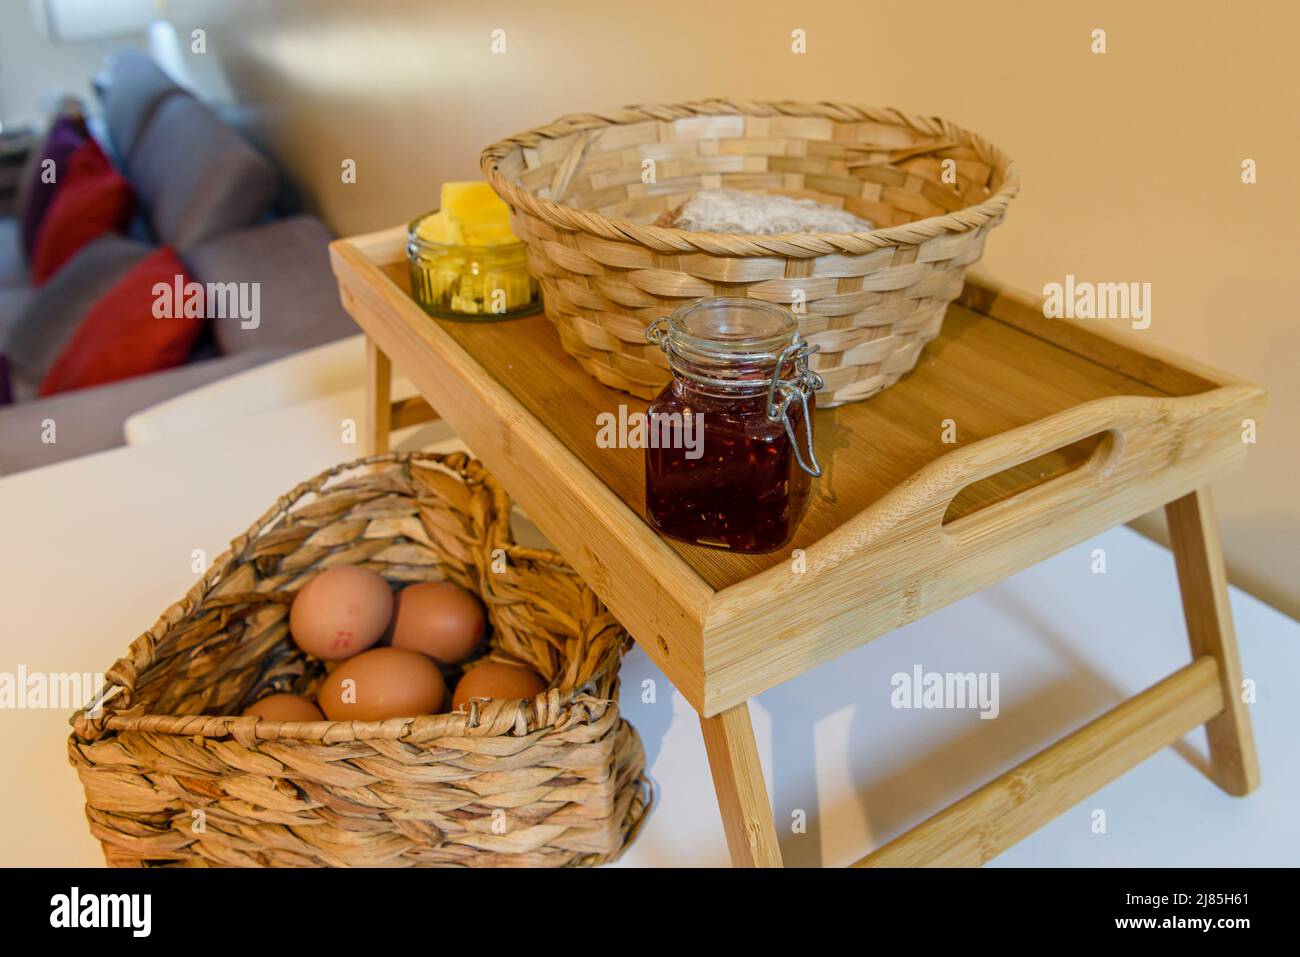 Basket of traditional Irish wheaten bread, eggs, butter and jam at an Air B&B. Stock Photo